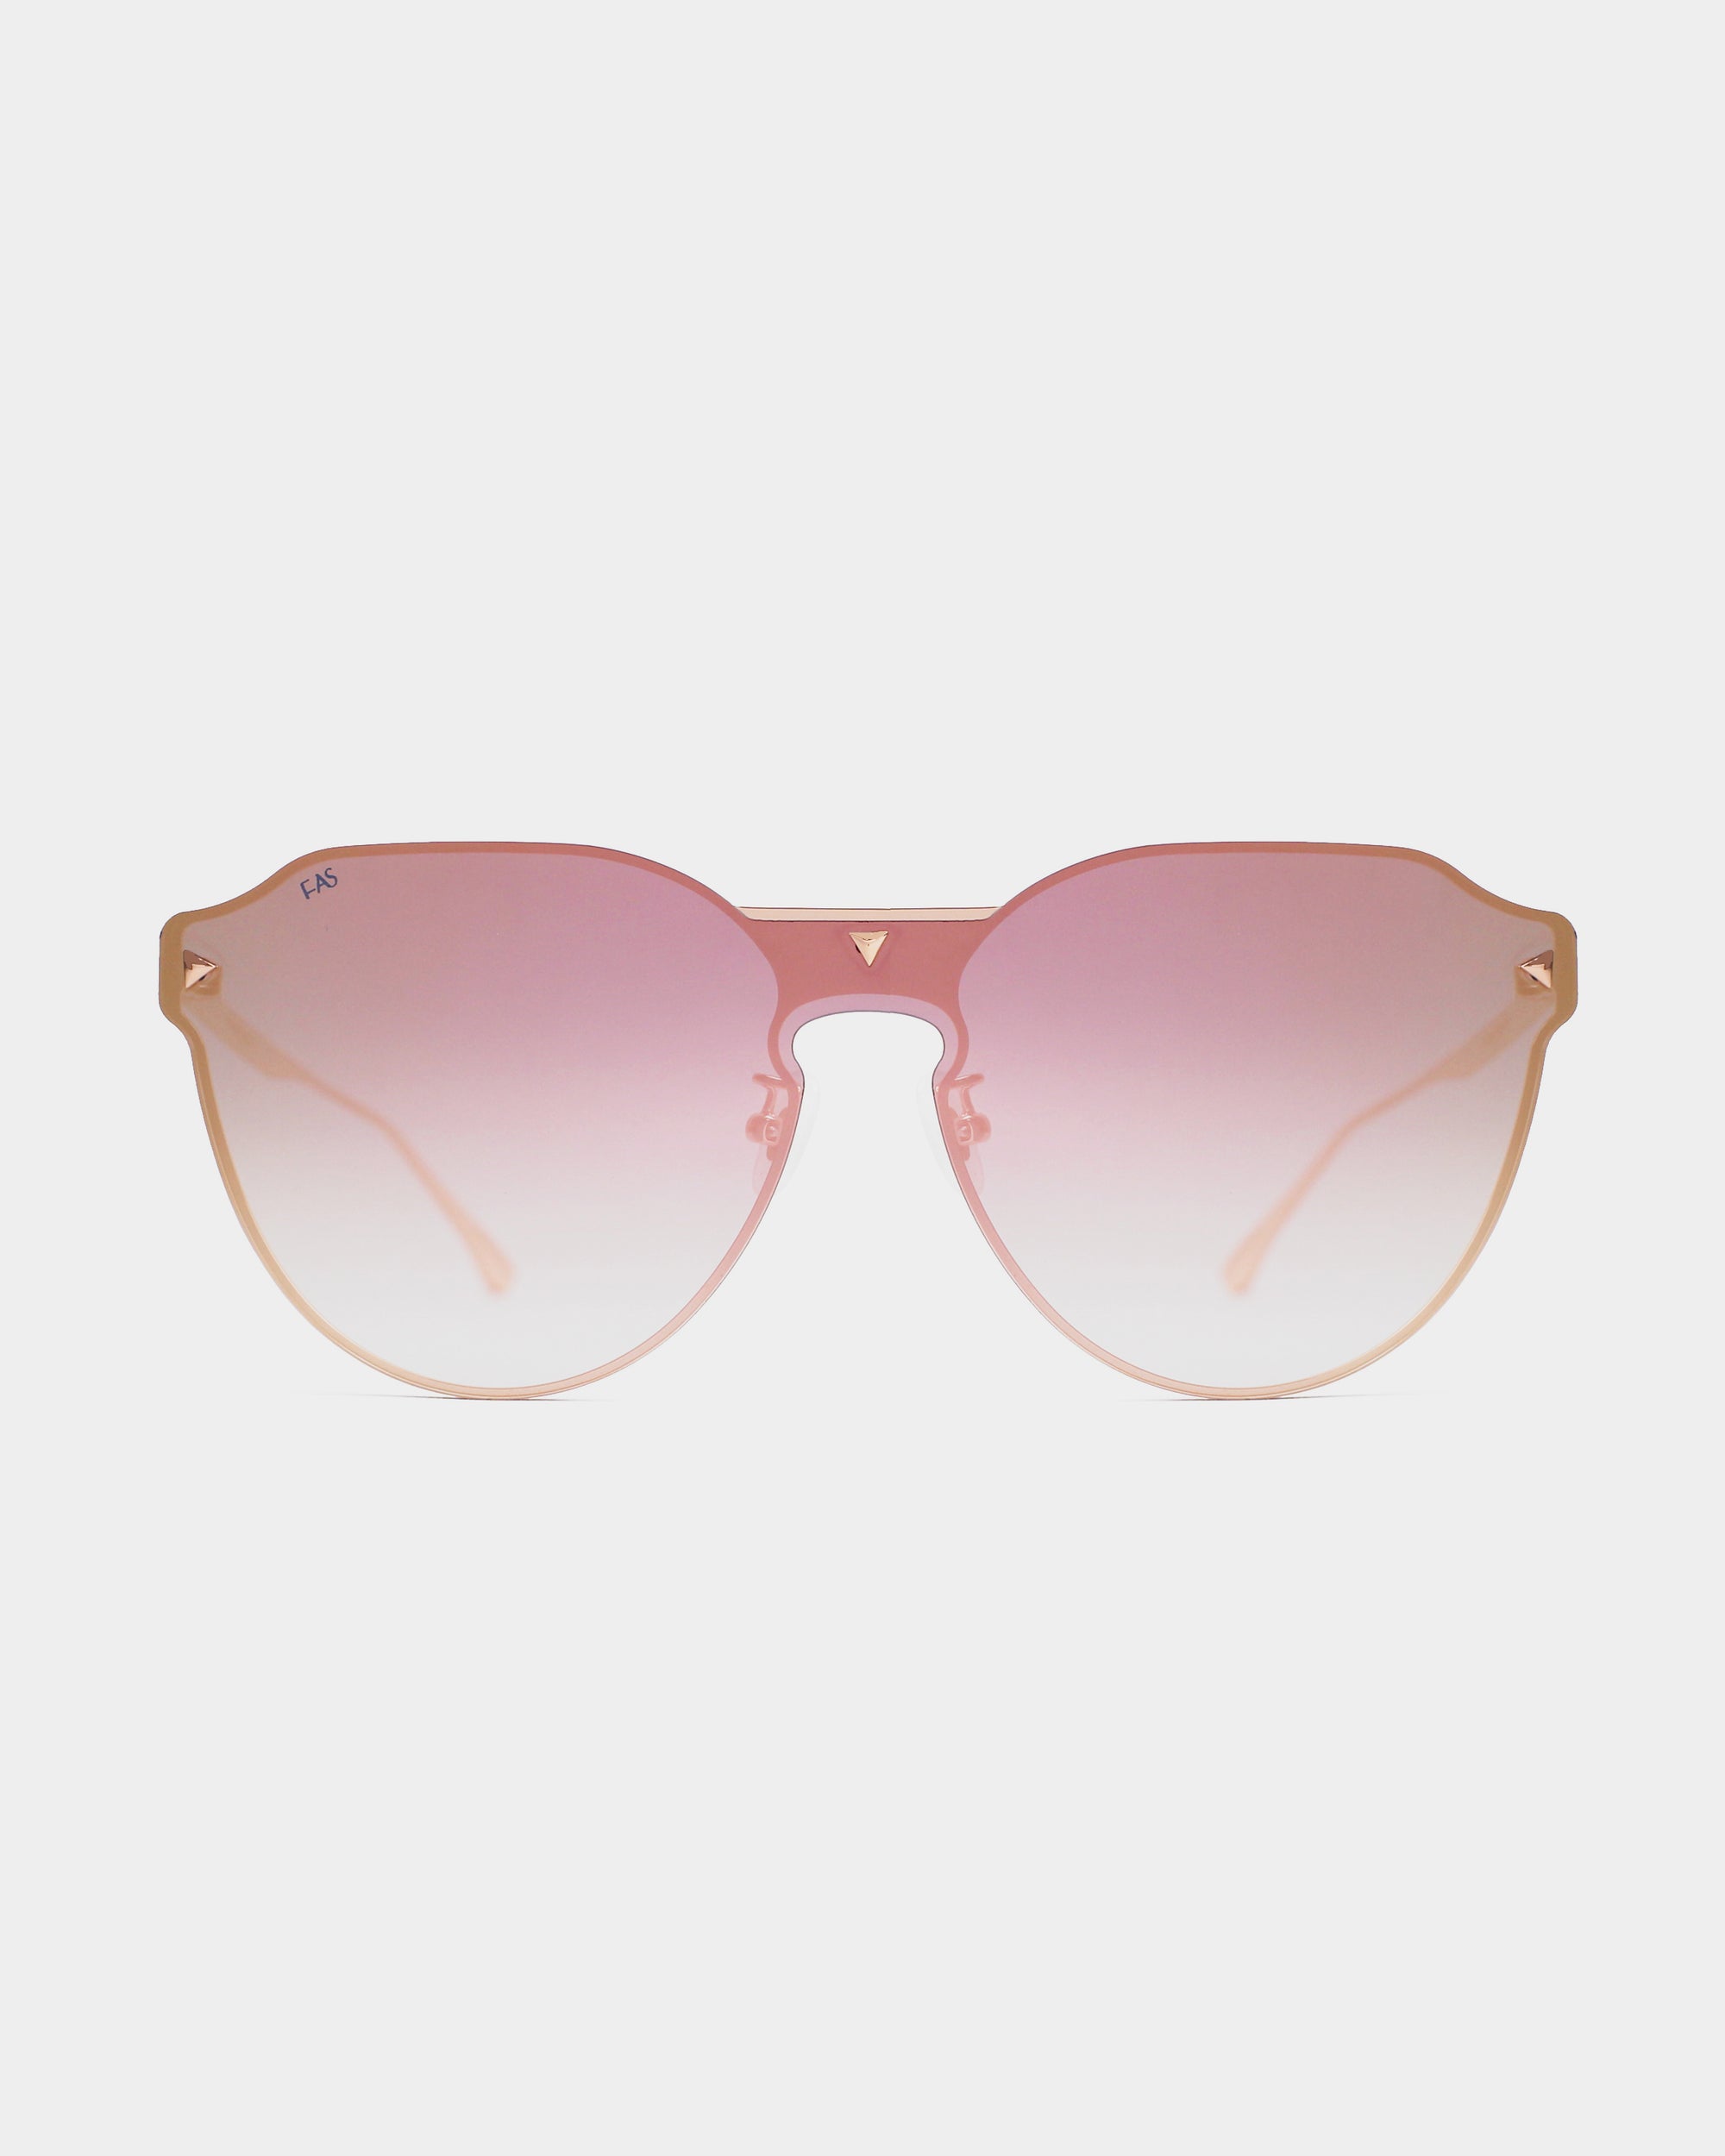 A pair of stylish **Error 404** sunglasses with a light peach frame and round gradient lenses that fade from pink at the top to light pink at the bottom. Featuring 18-karat gold plating, the bridge is subtle, and the arms are thin and elegant, matching the peach color of the frame. These exquisite sunglasses are crafted by **For Art&#39;s Sake®**.